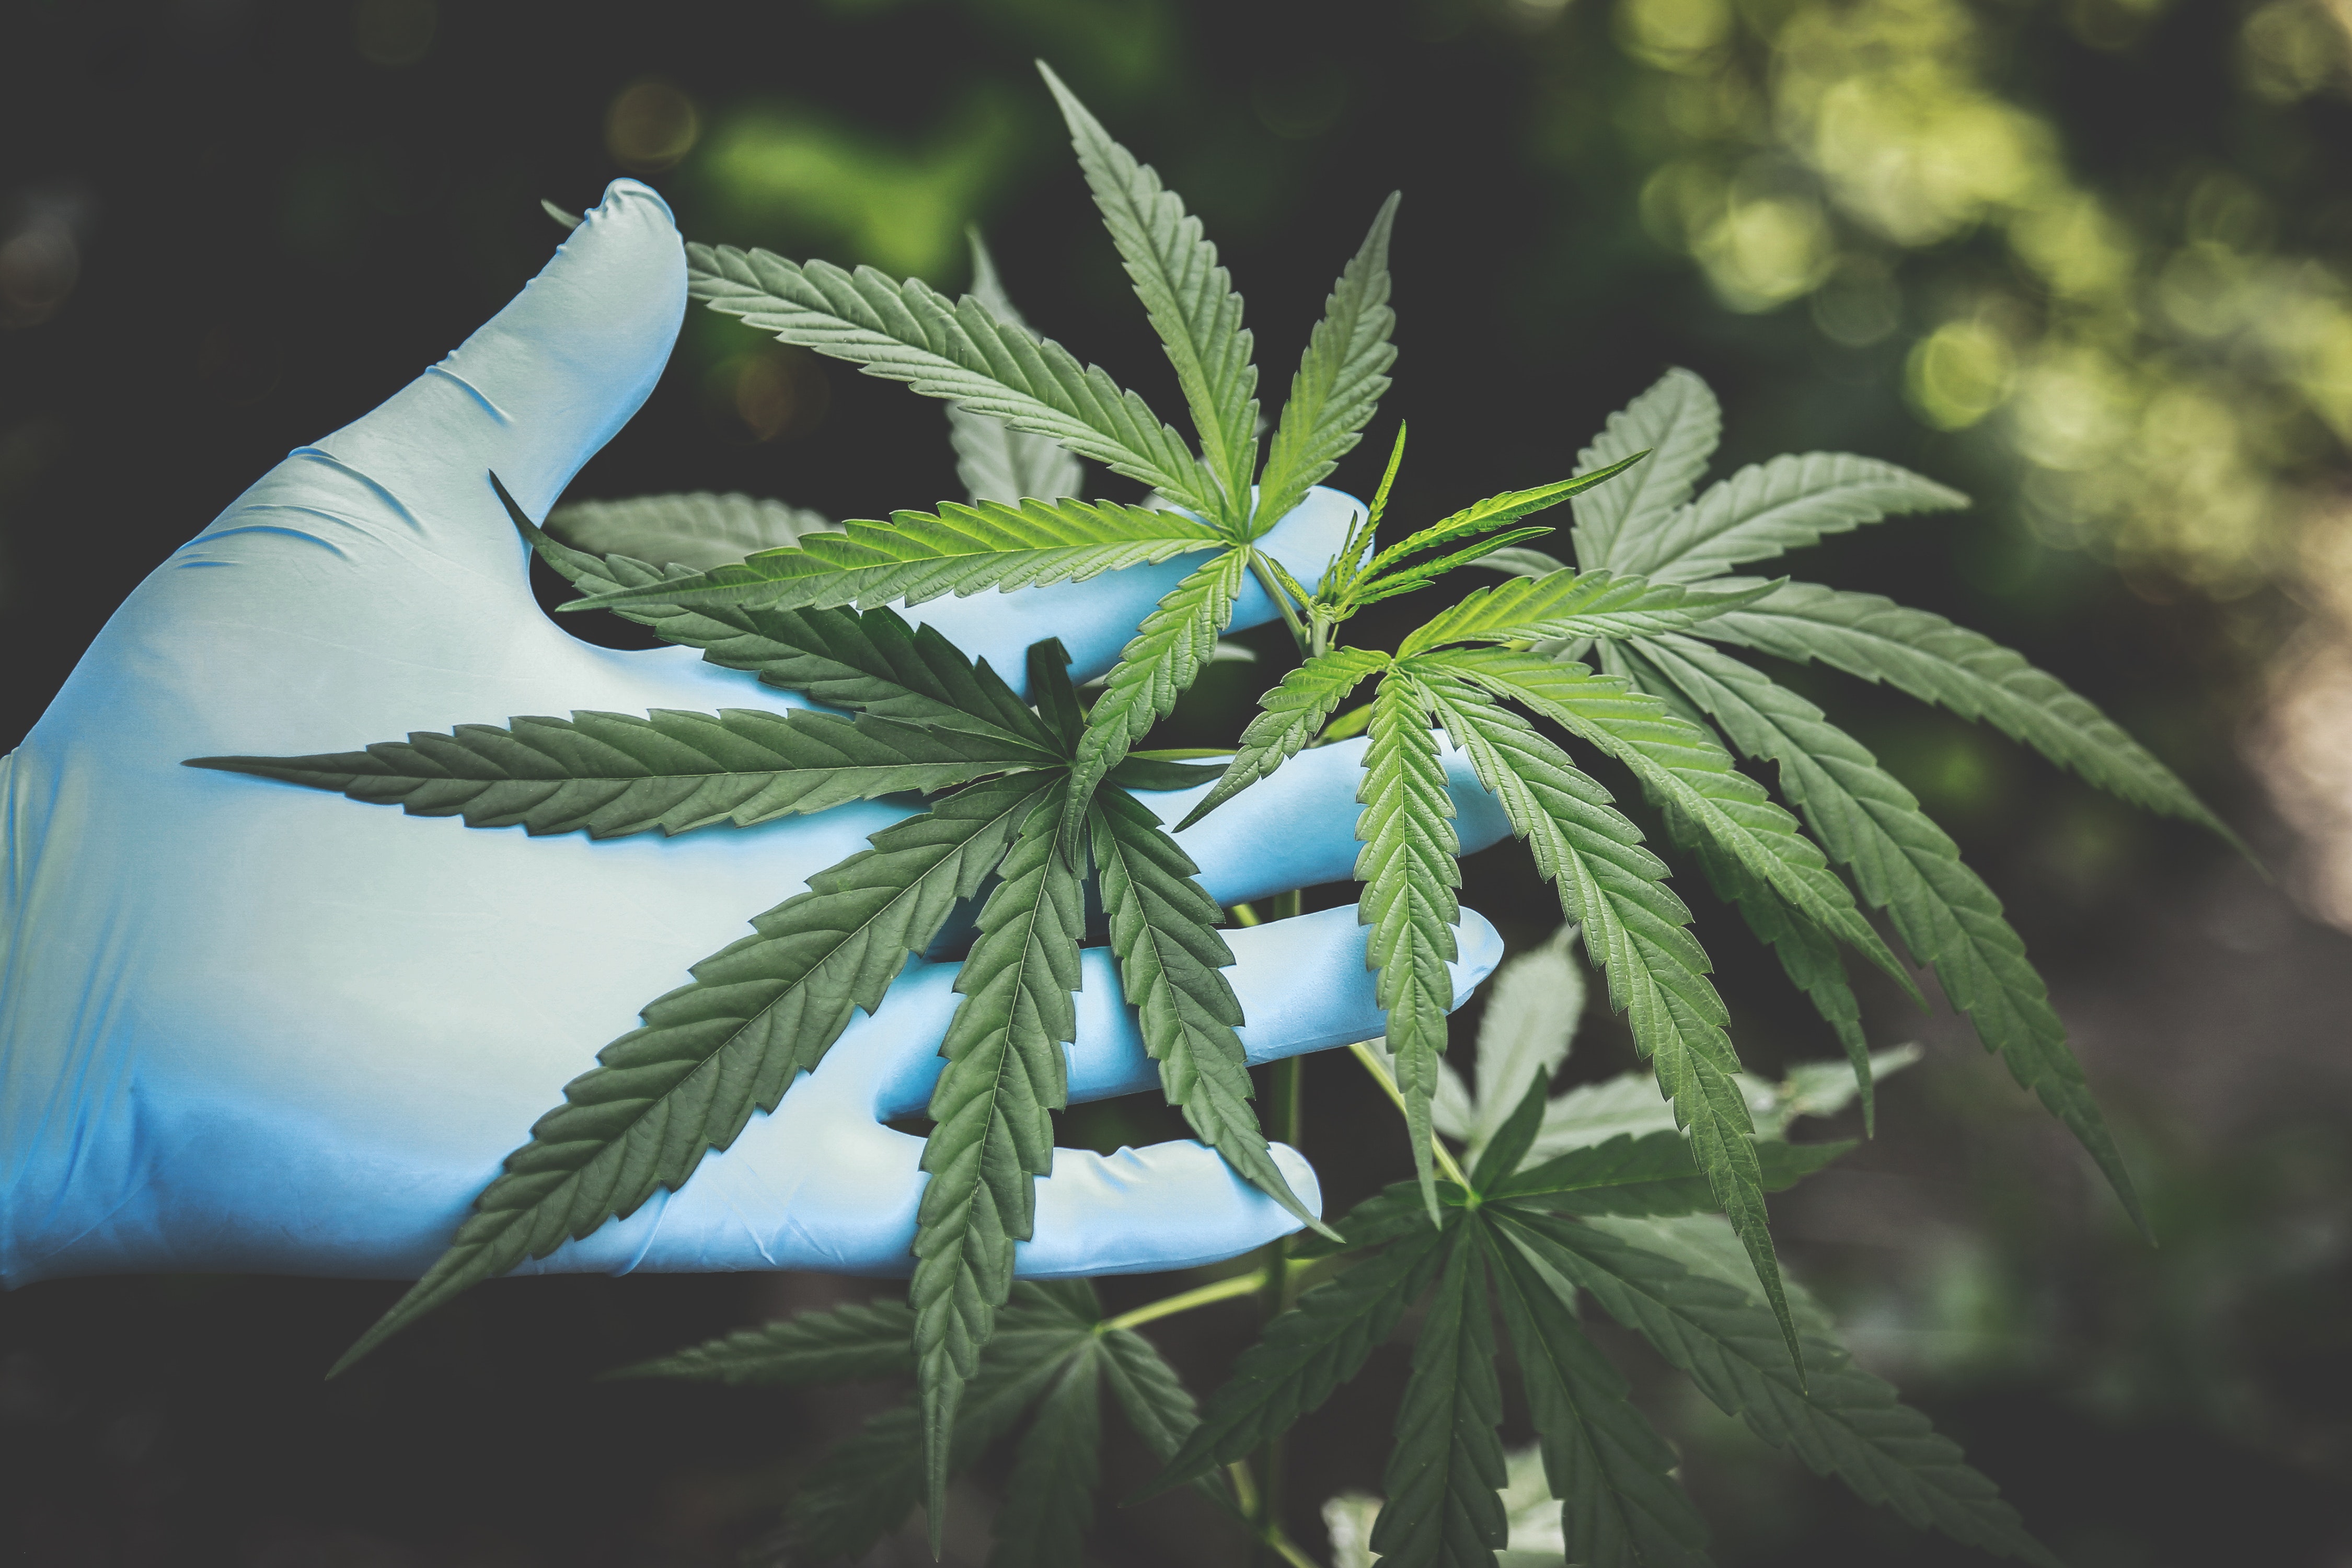 A gloved hand gently holding a cannabis plant, symbolizing medical marijuana cultivation or examination, with a blurred natural background suggesting an outdoor setting.